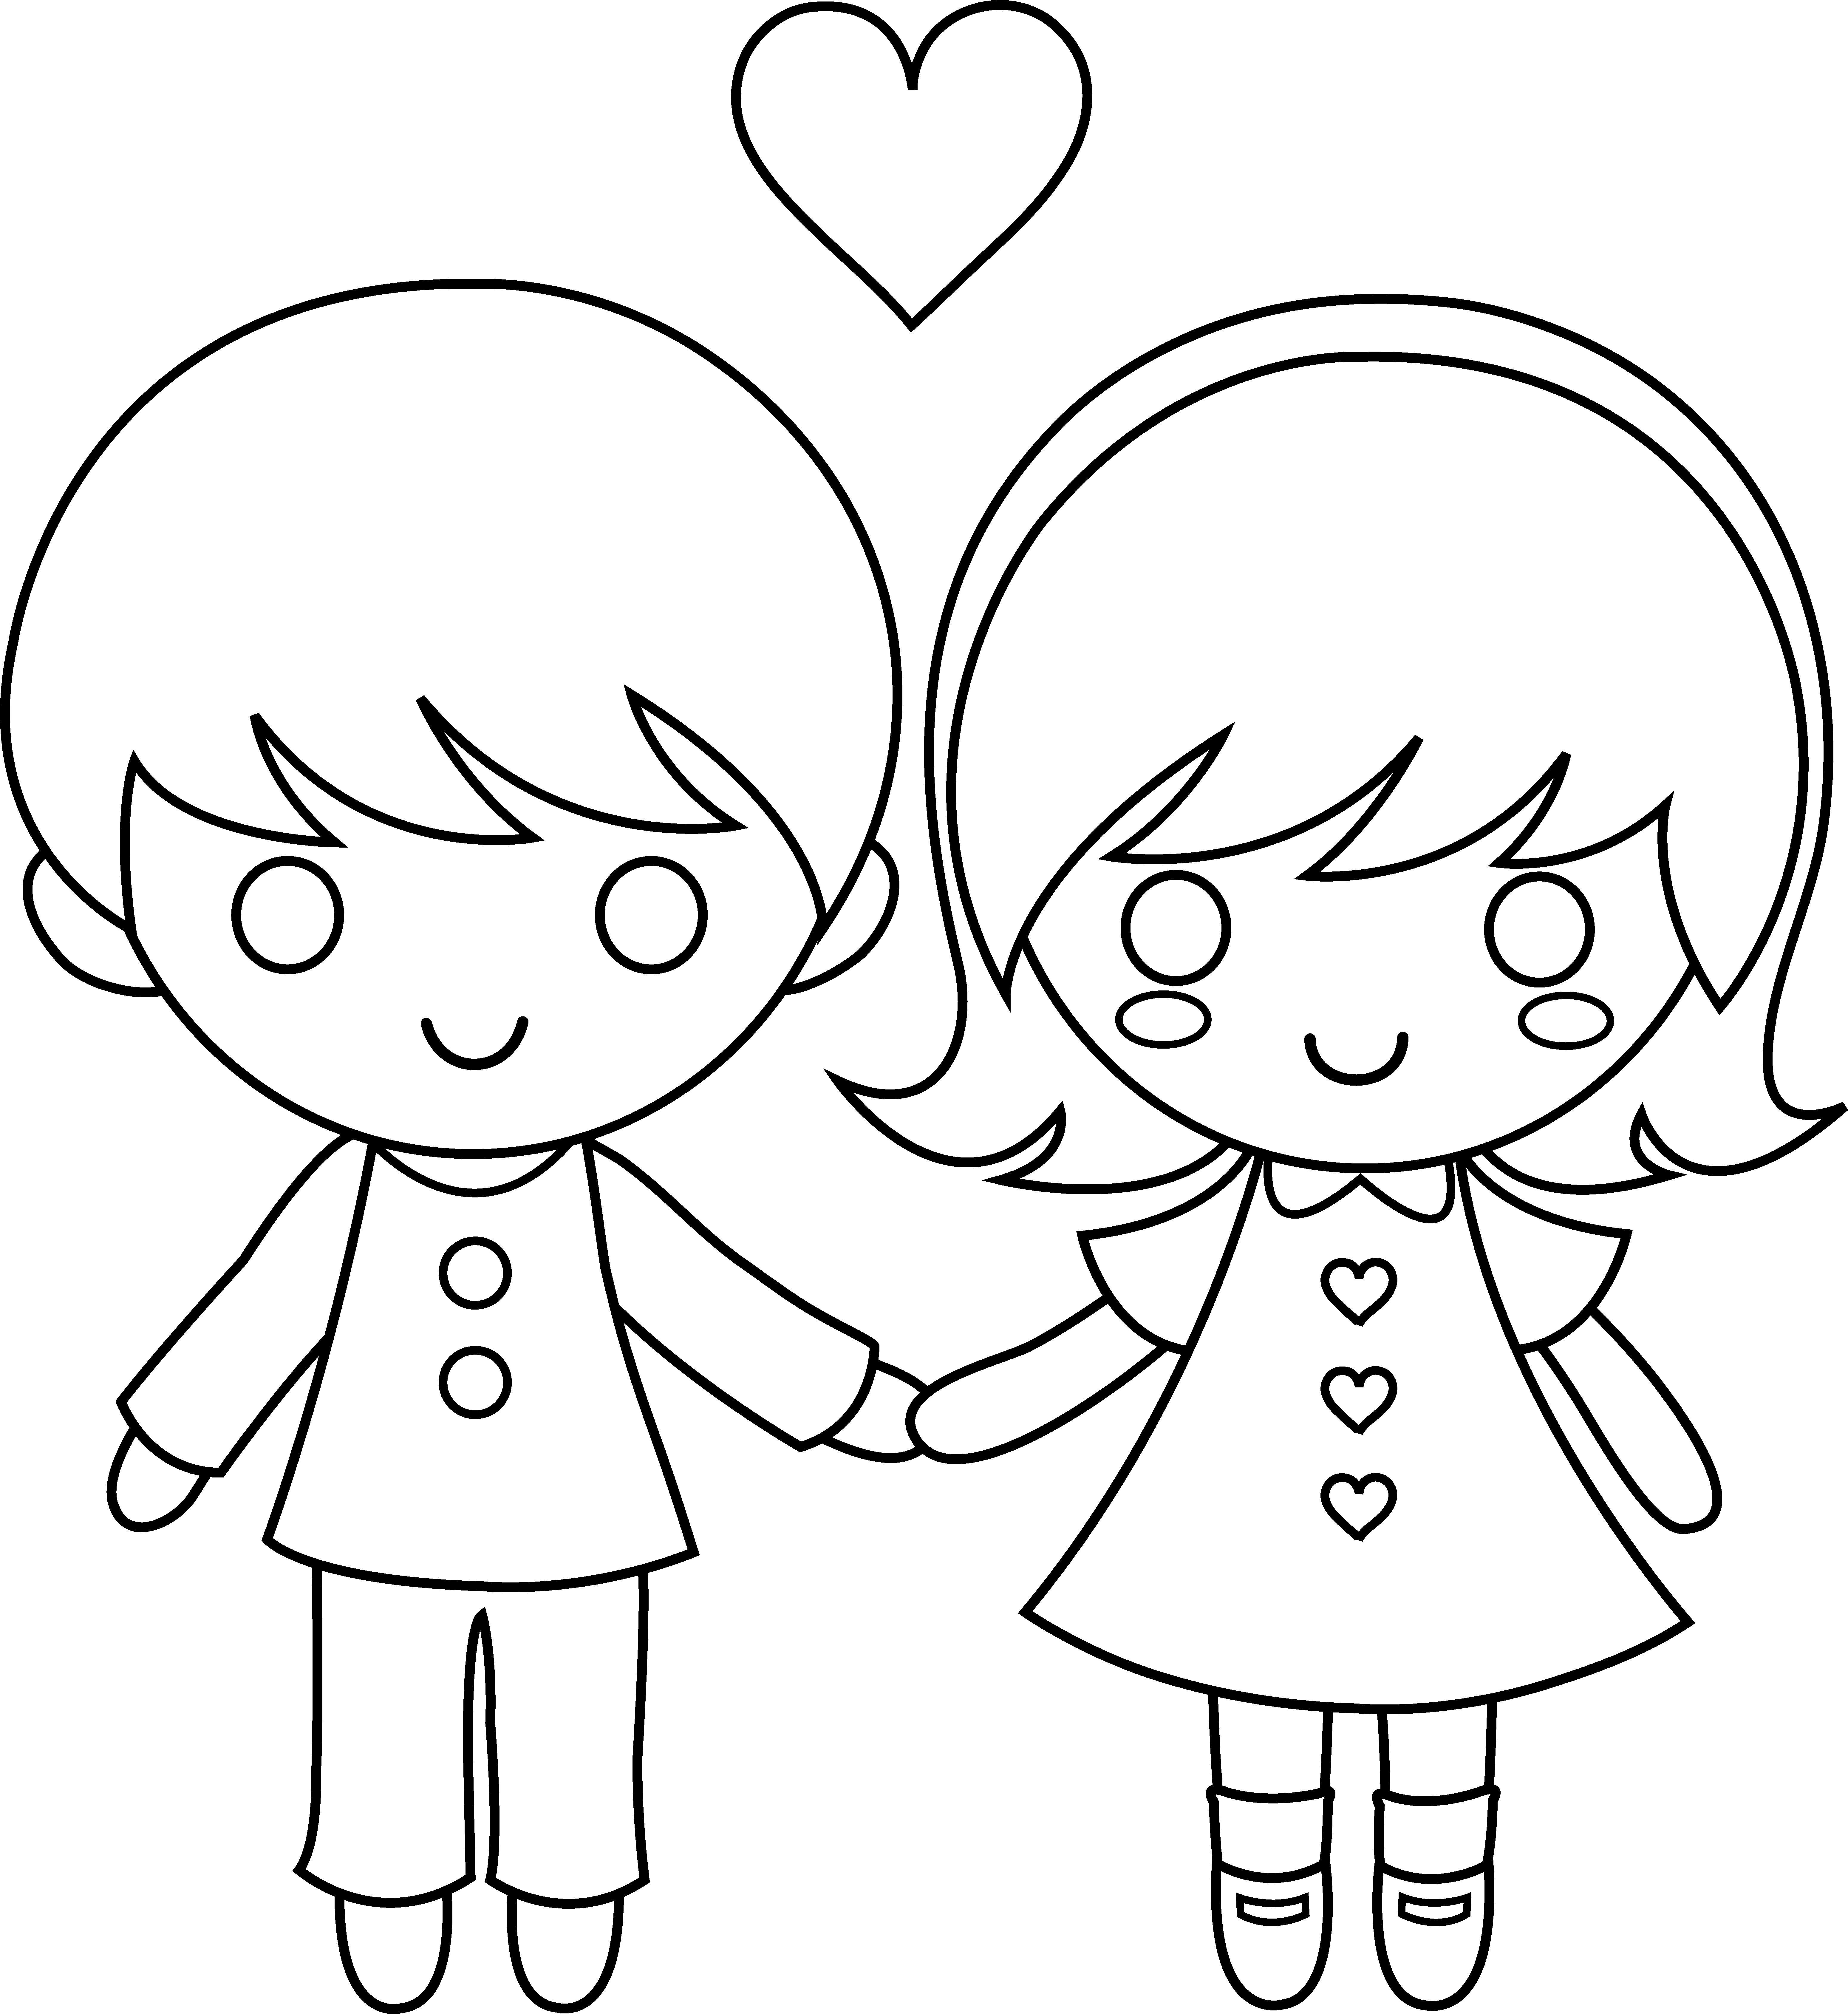 Download Child Clipart At Getdrawings Com Free For Draw A Little Boy And Girl Holding Hands Png Image With No Background Pngkey Com